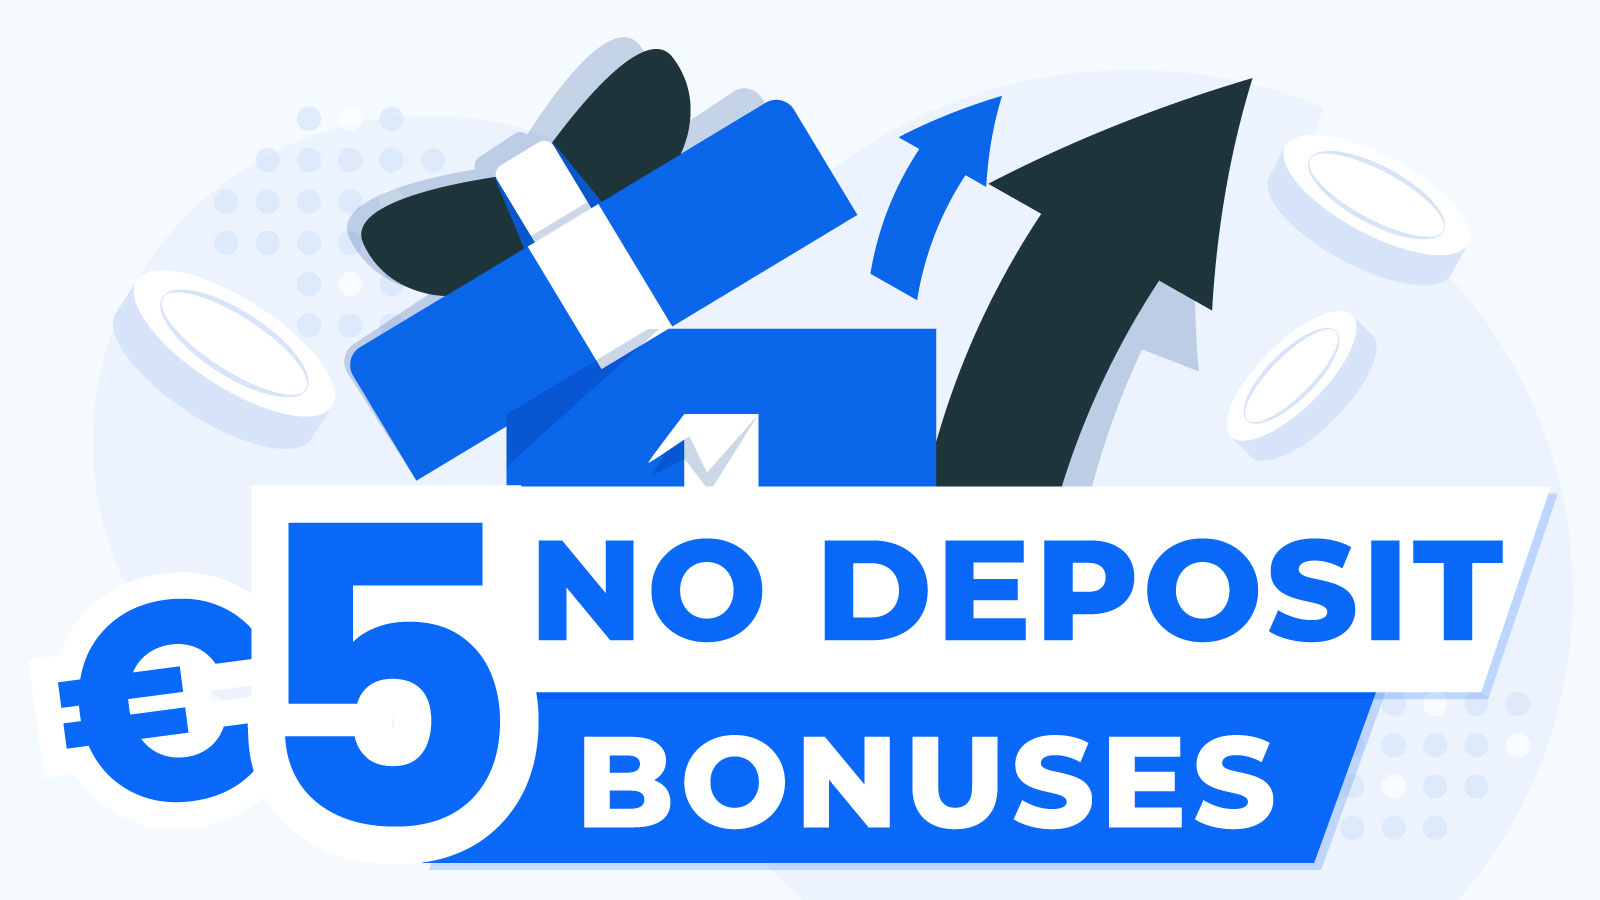 The #1 Trusted Source for No Deposit Bonus Codes